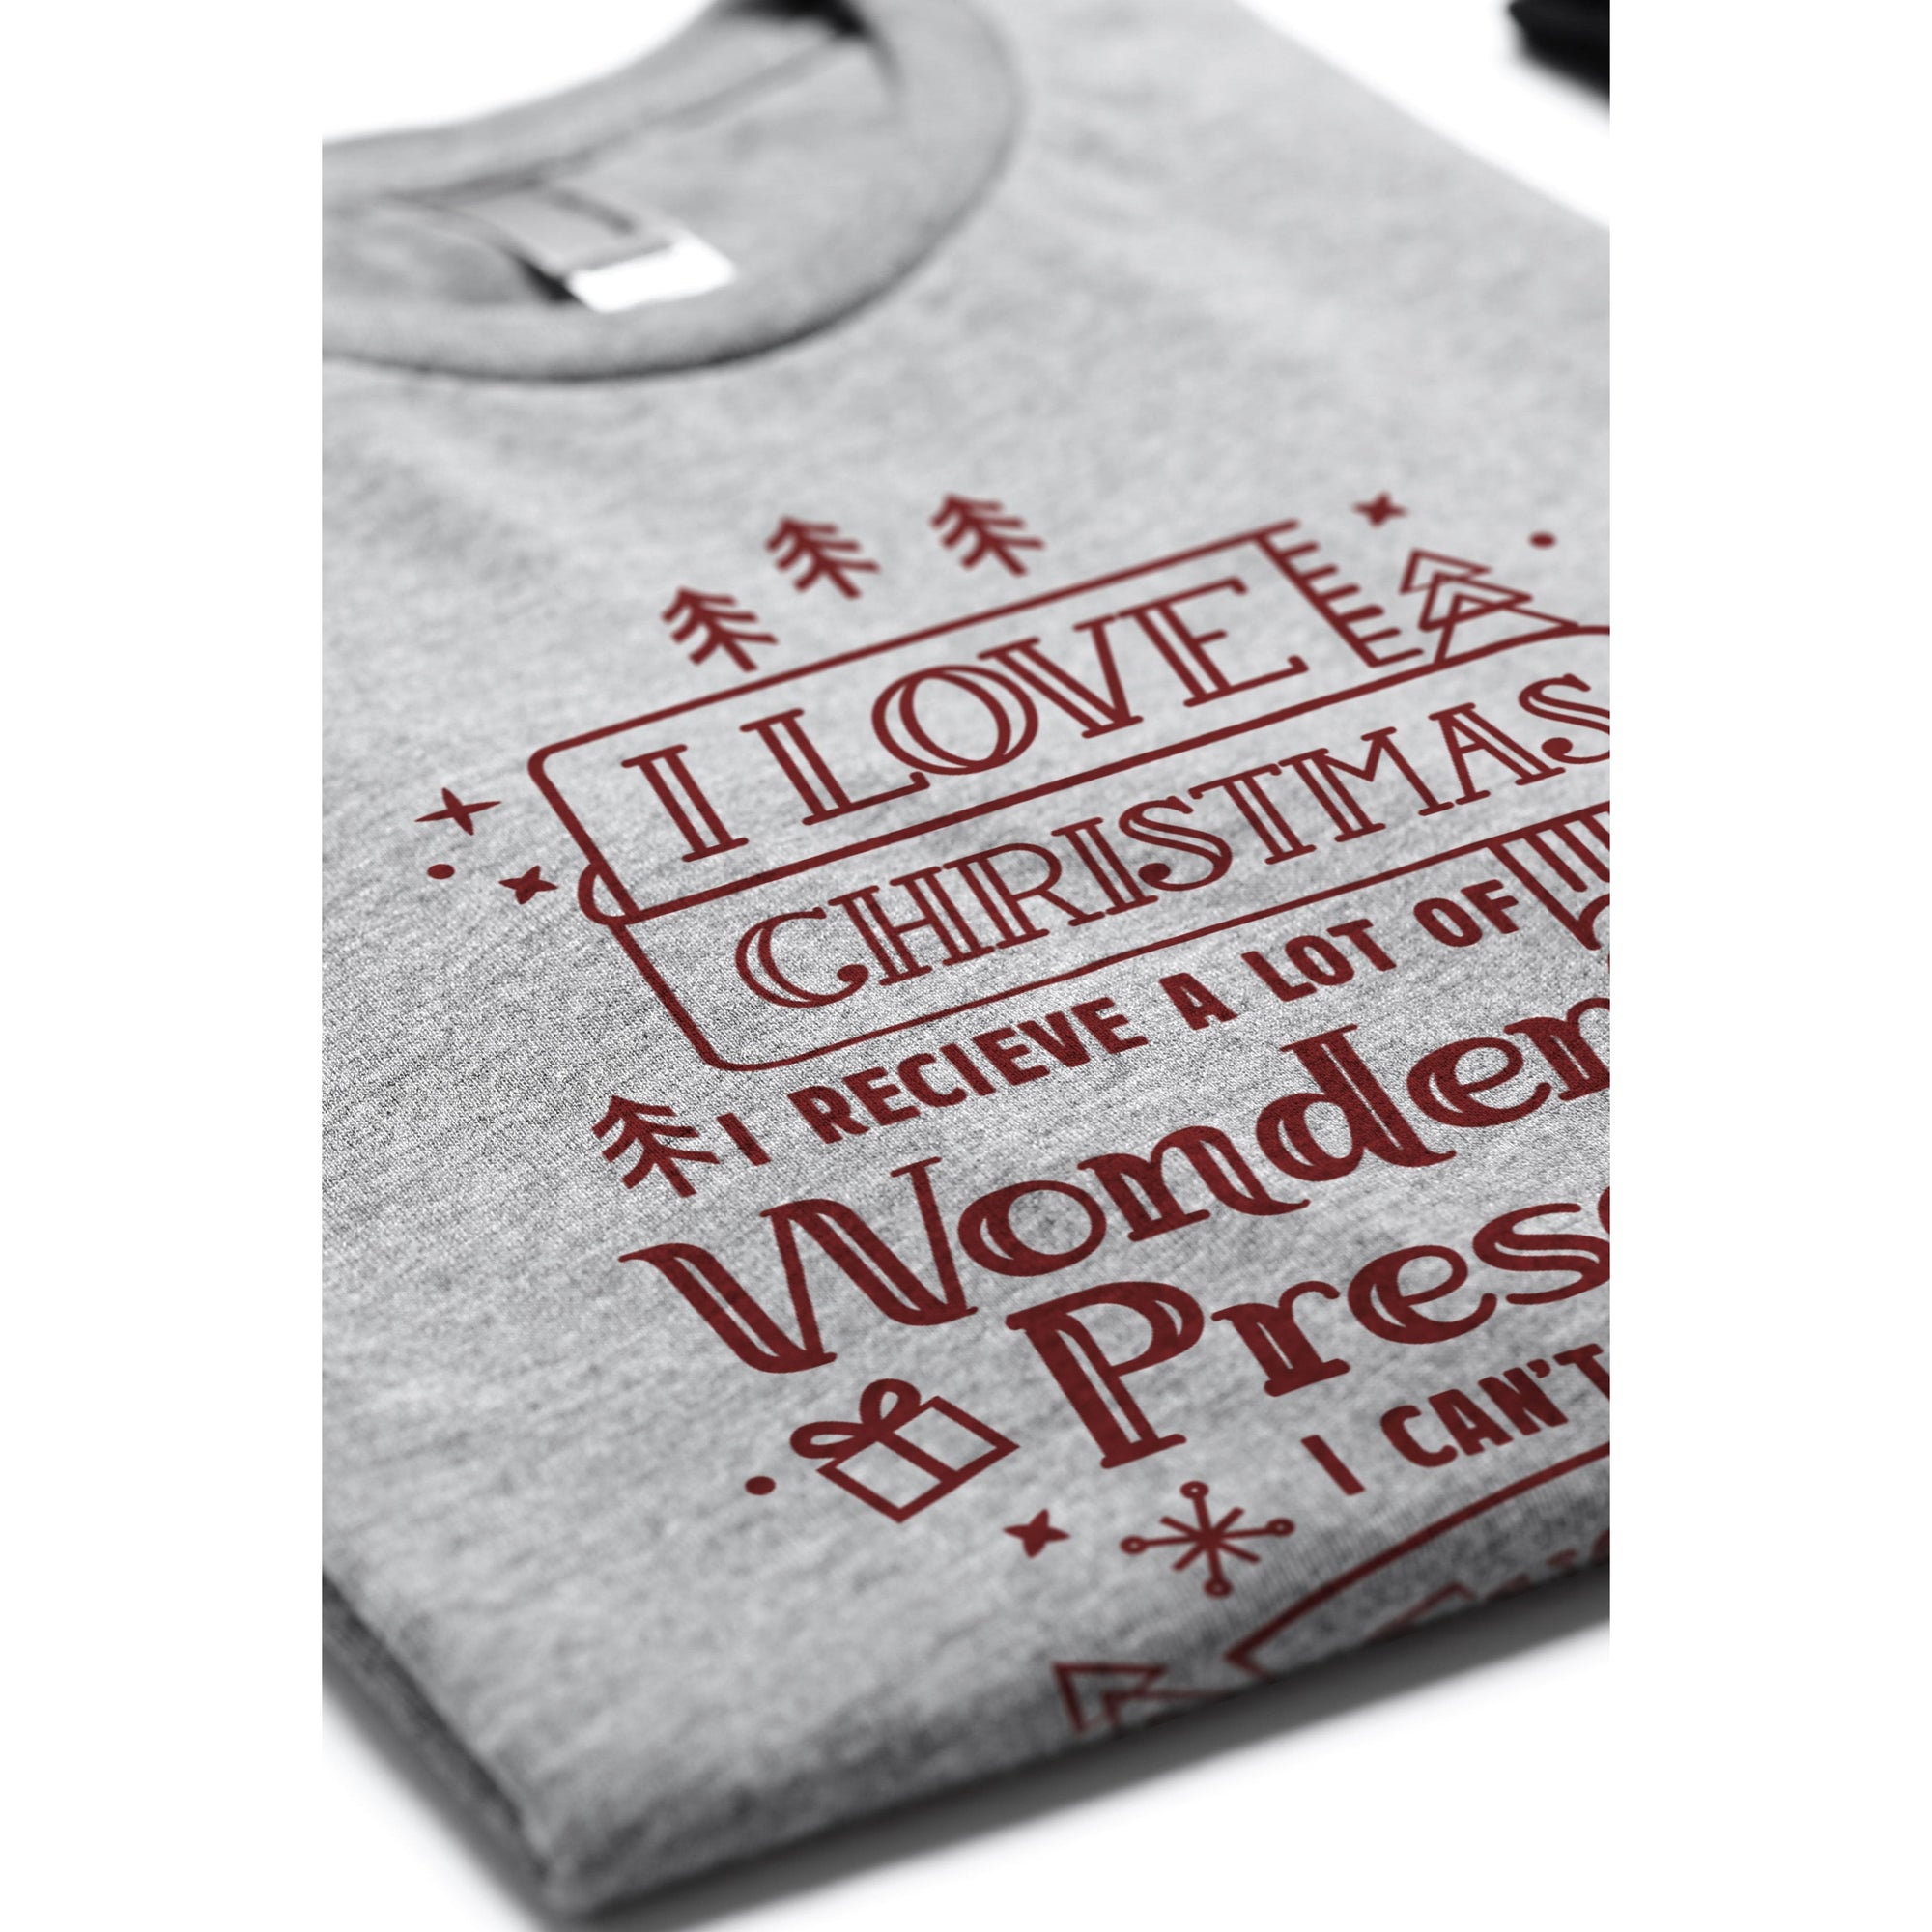 I Love Christmas. I Receive A Lot Of Wonderful Presents I Can’t Wait To Exchange. - threadtank | stories you can wear